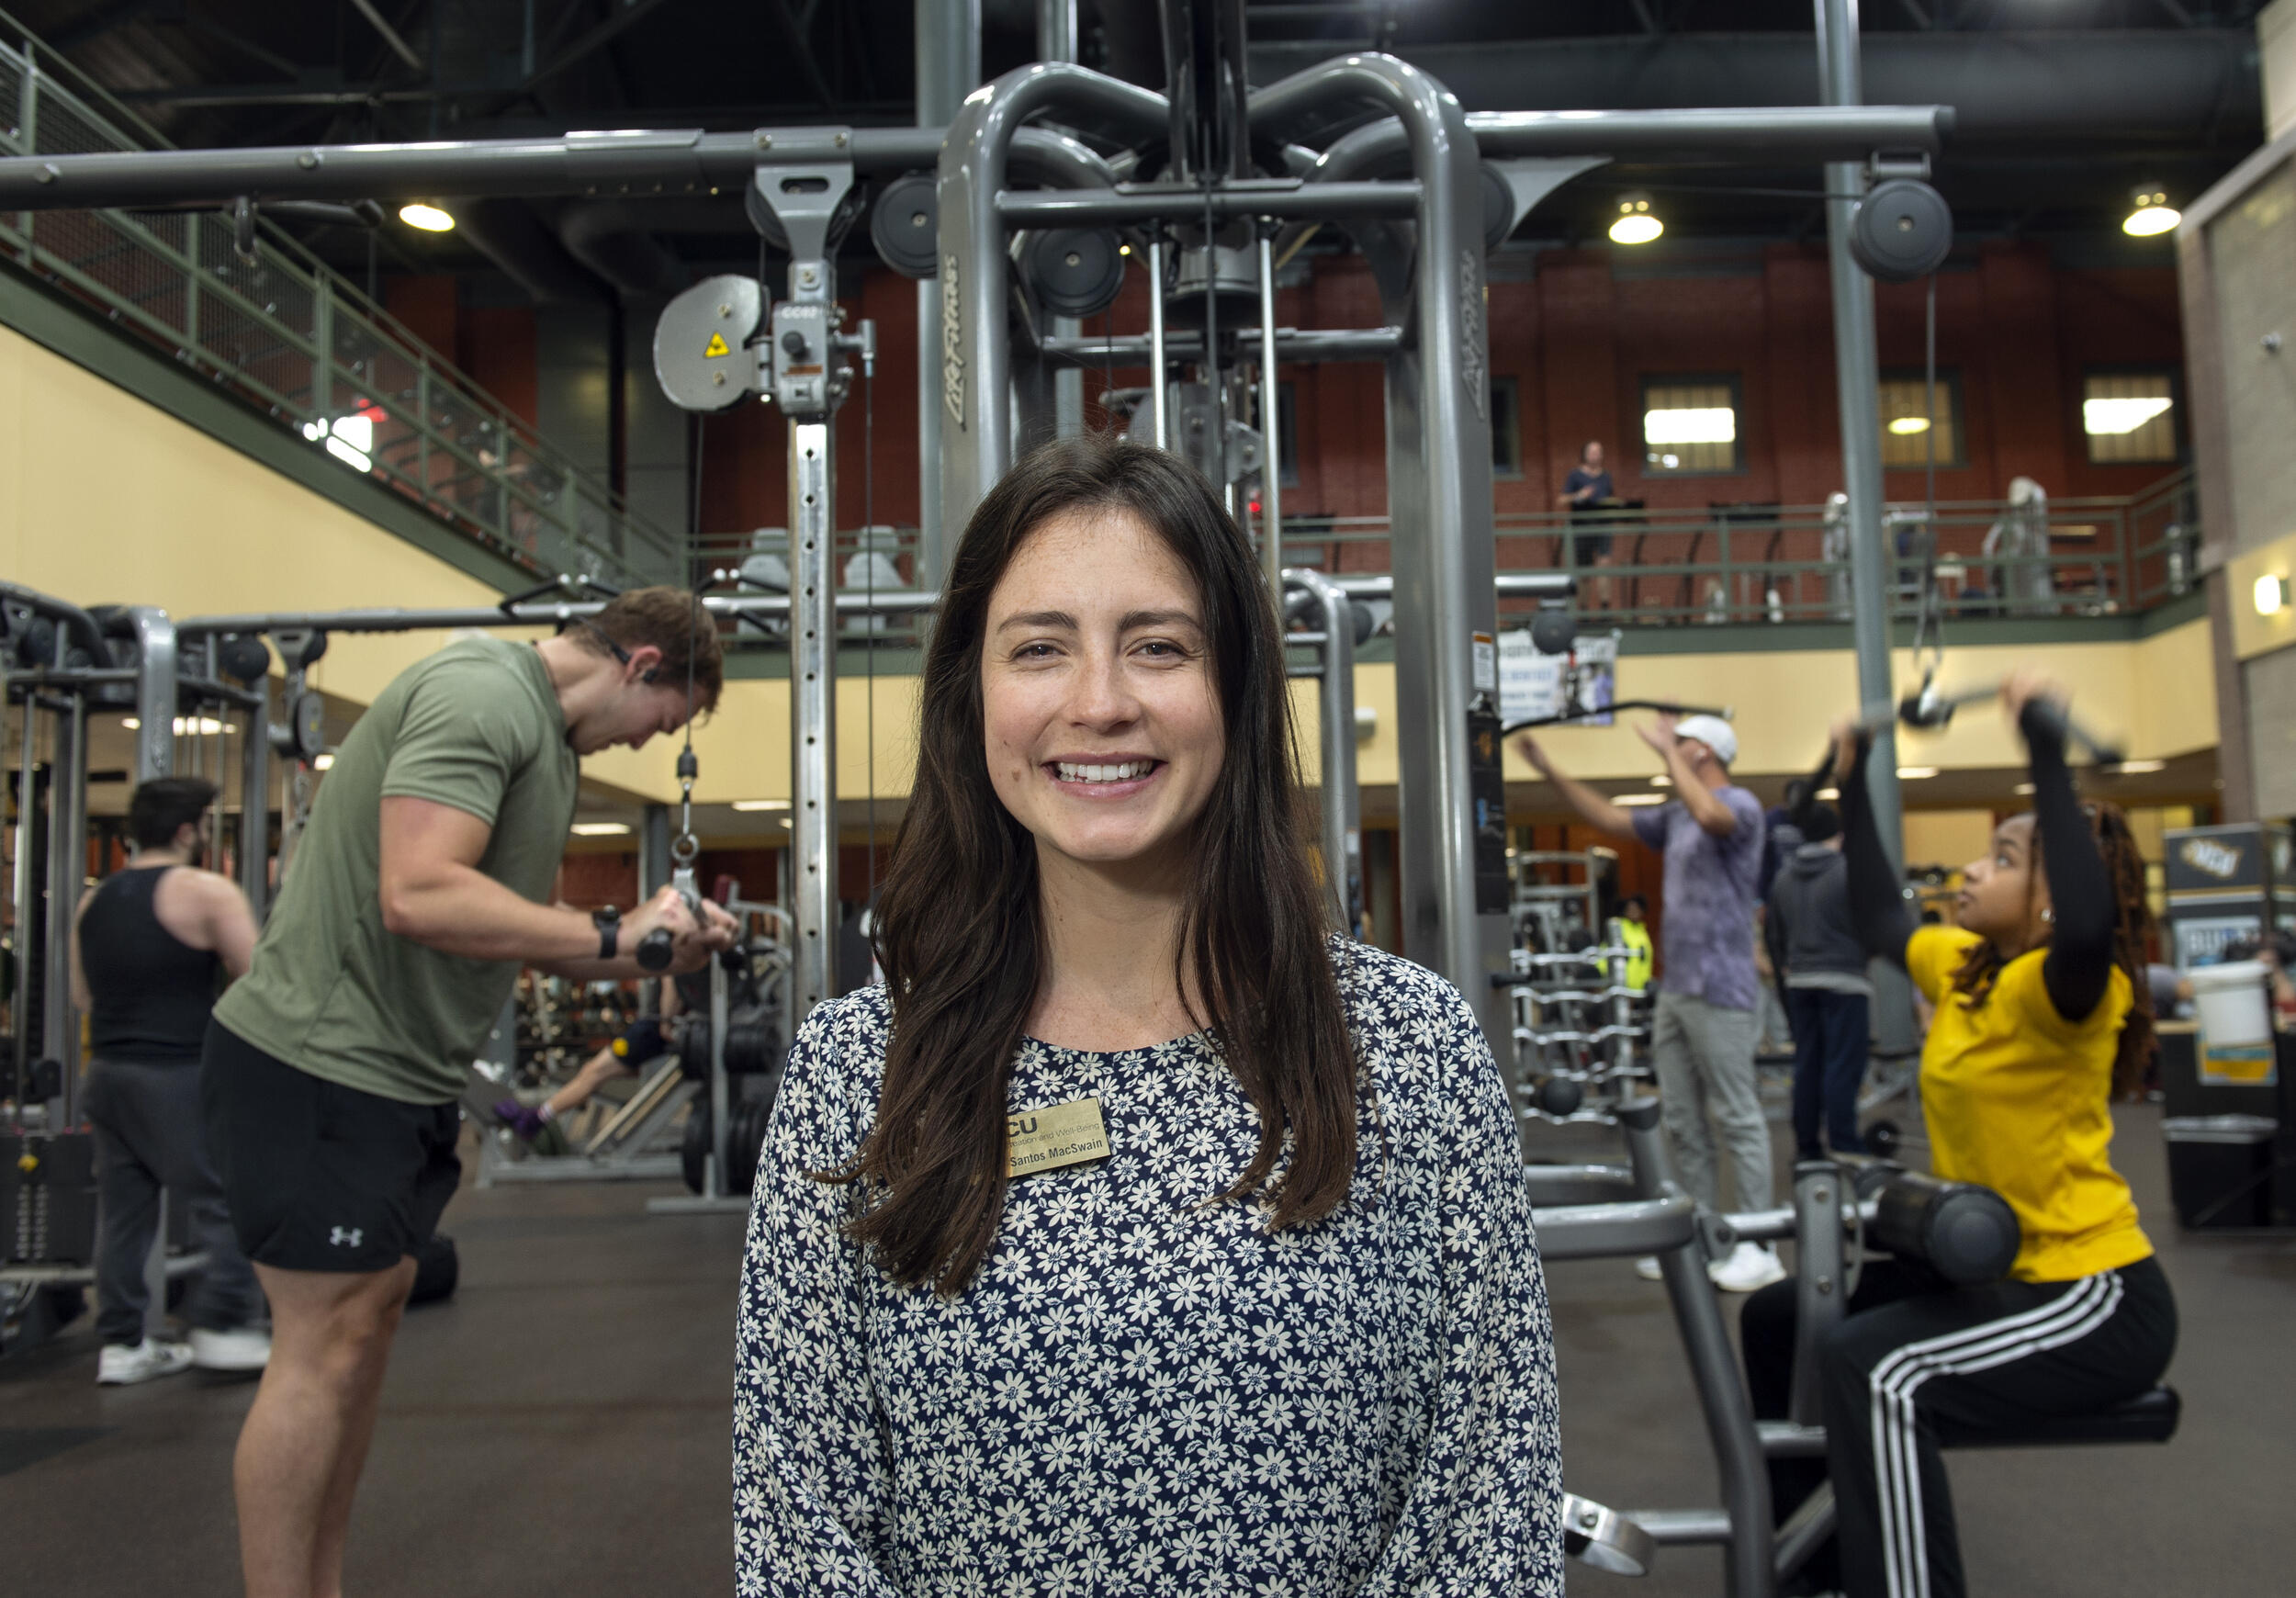 A woman smiling in a gym with people working out behind her